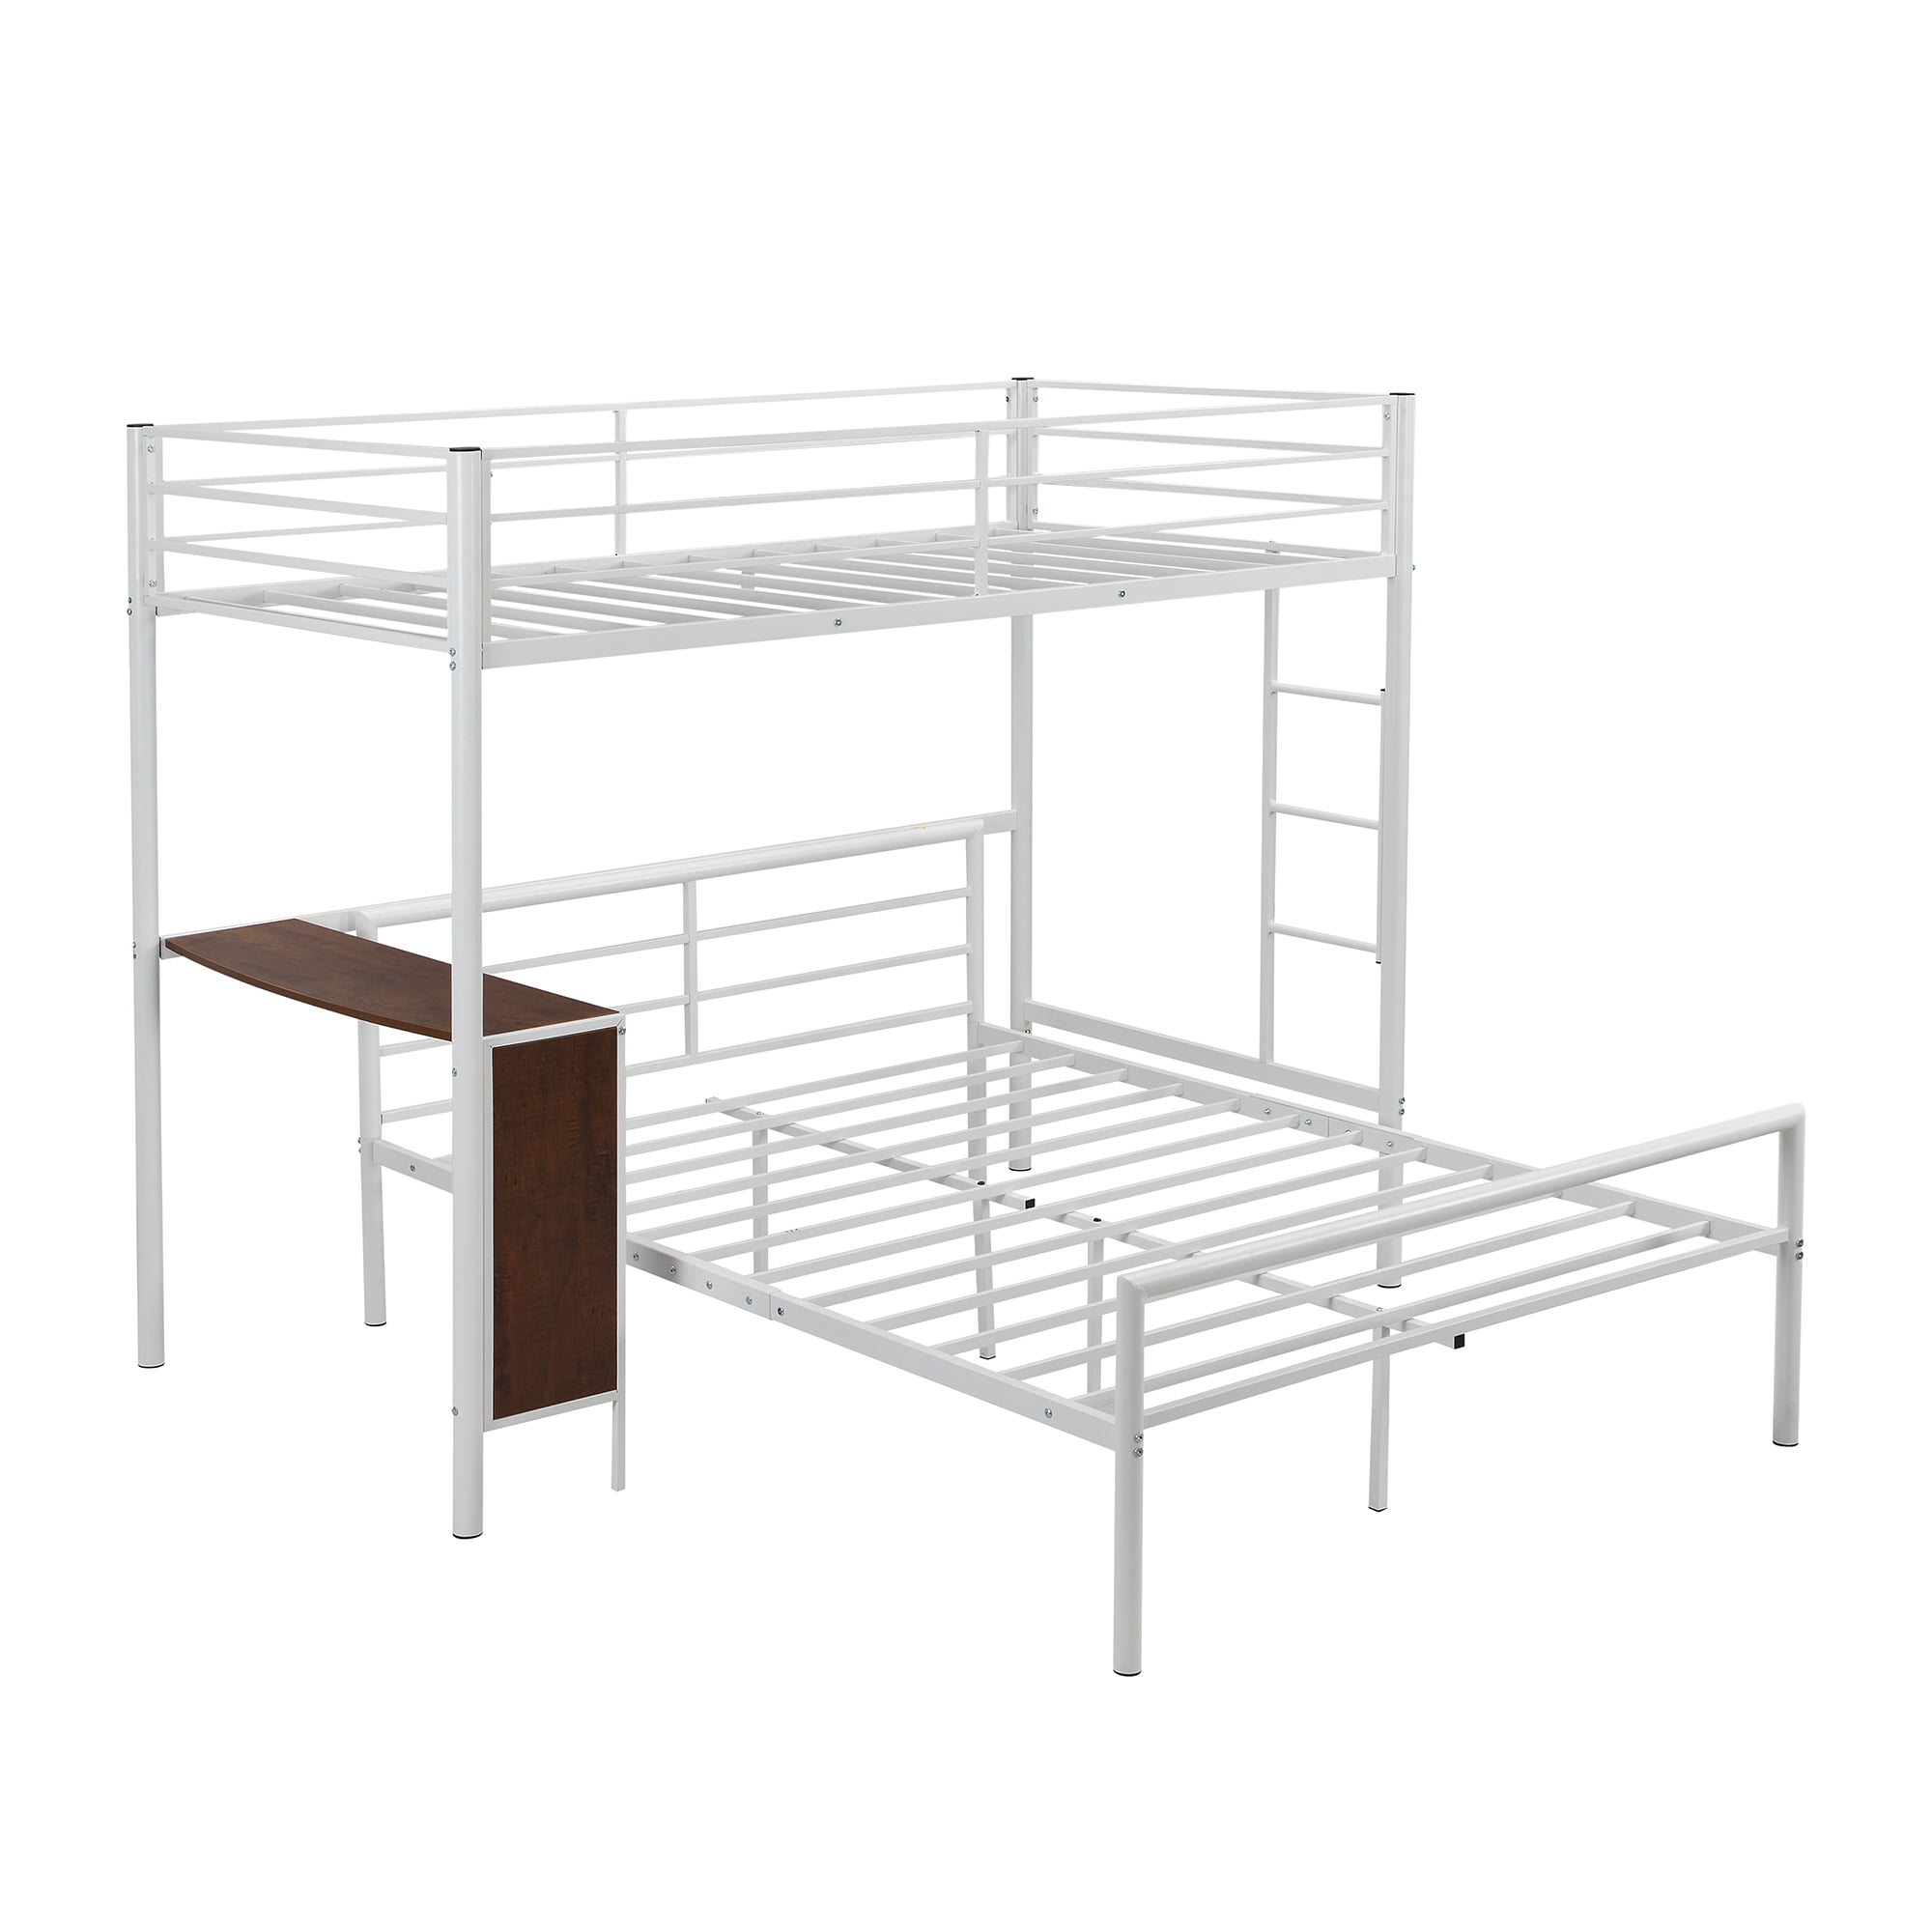 Metal Cover Bunk Bed White, Metal Bunk Beds Twin Over Full With Desk